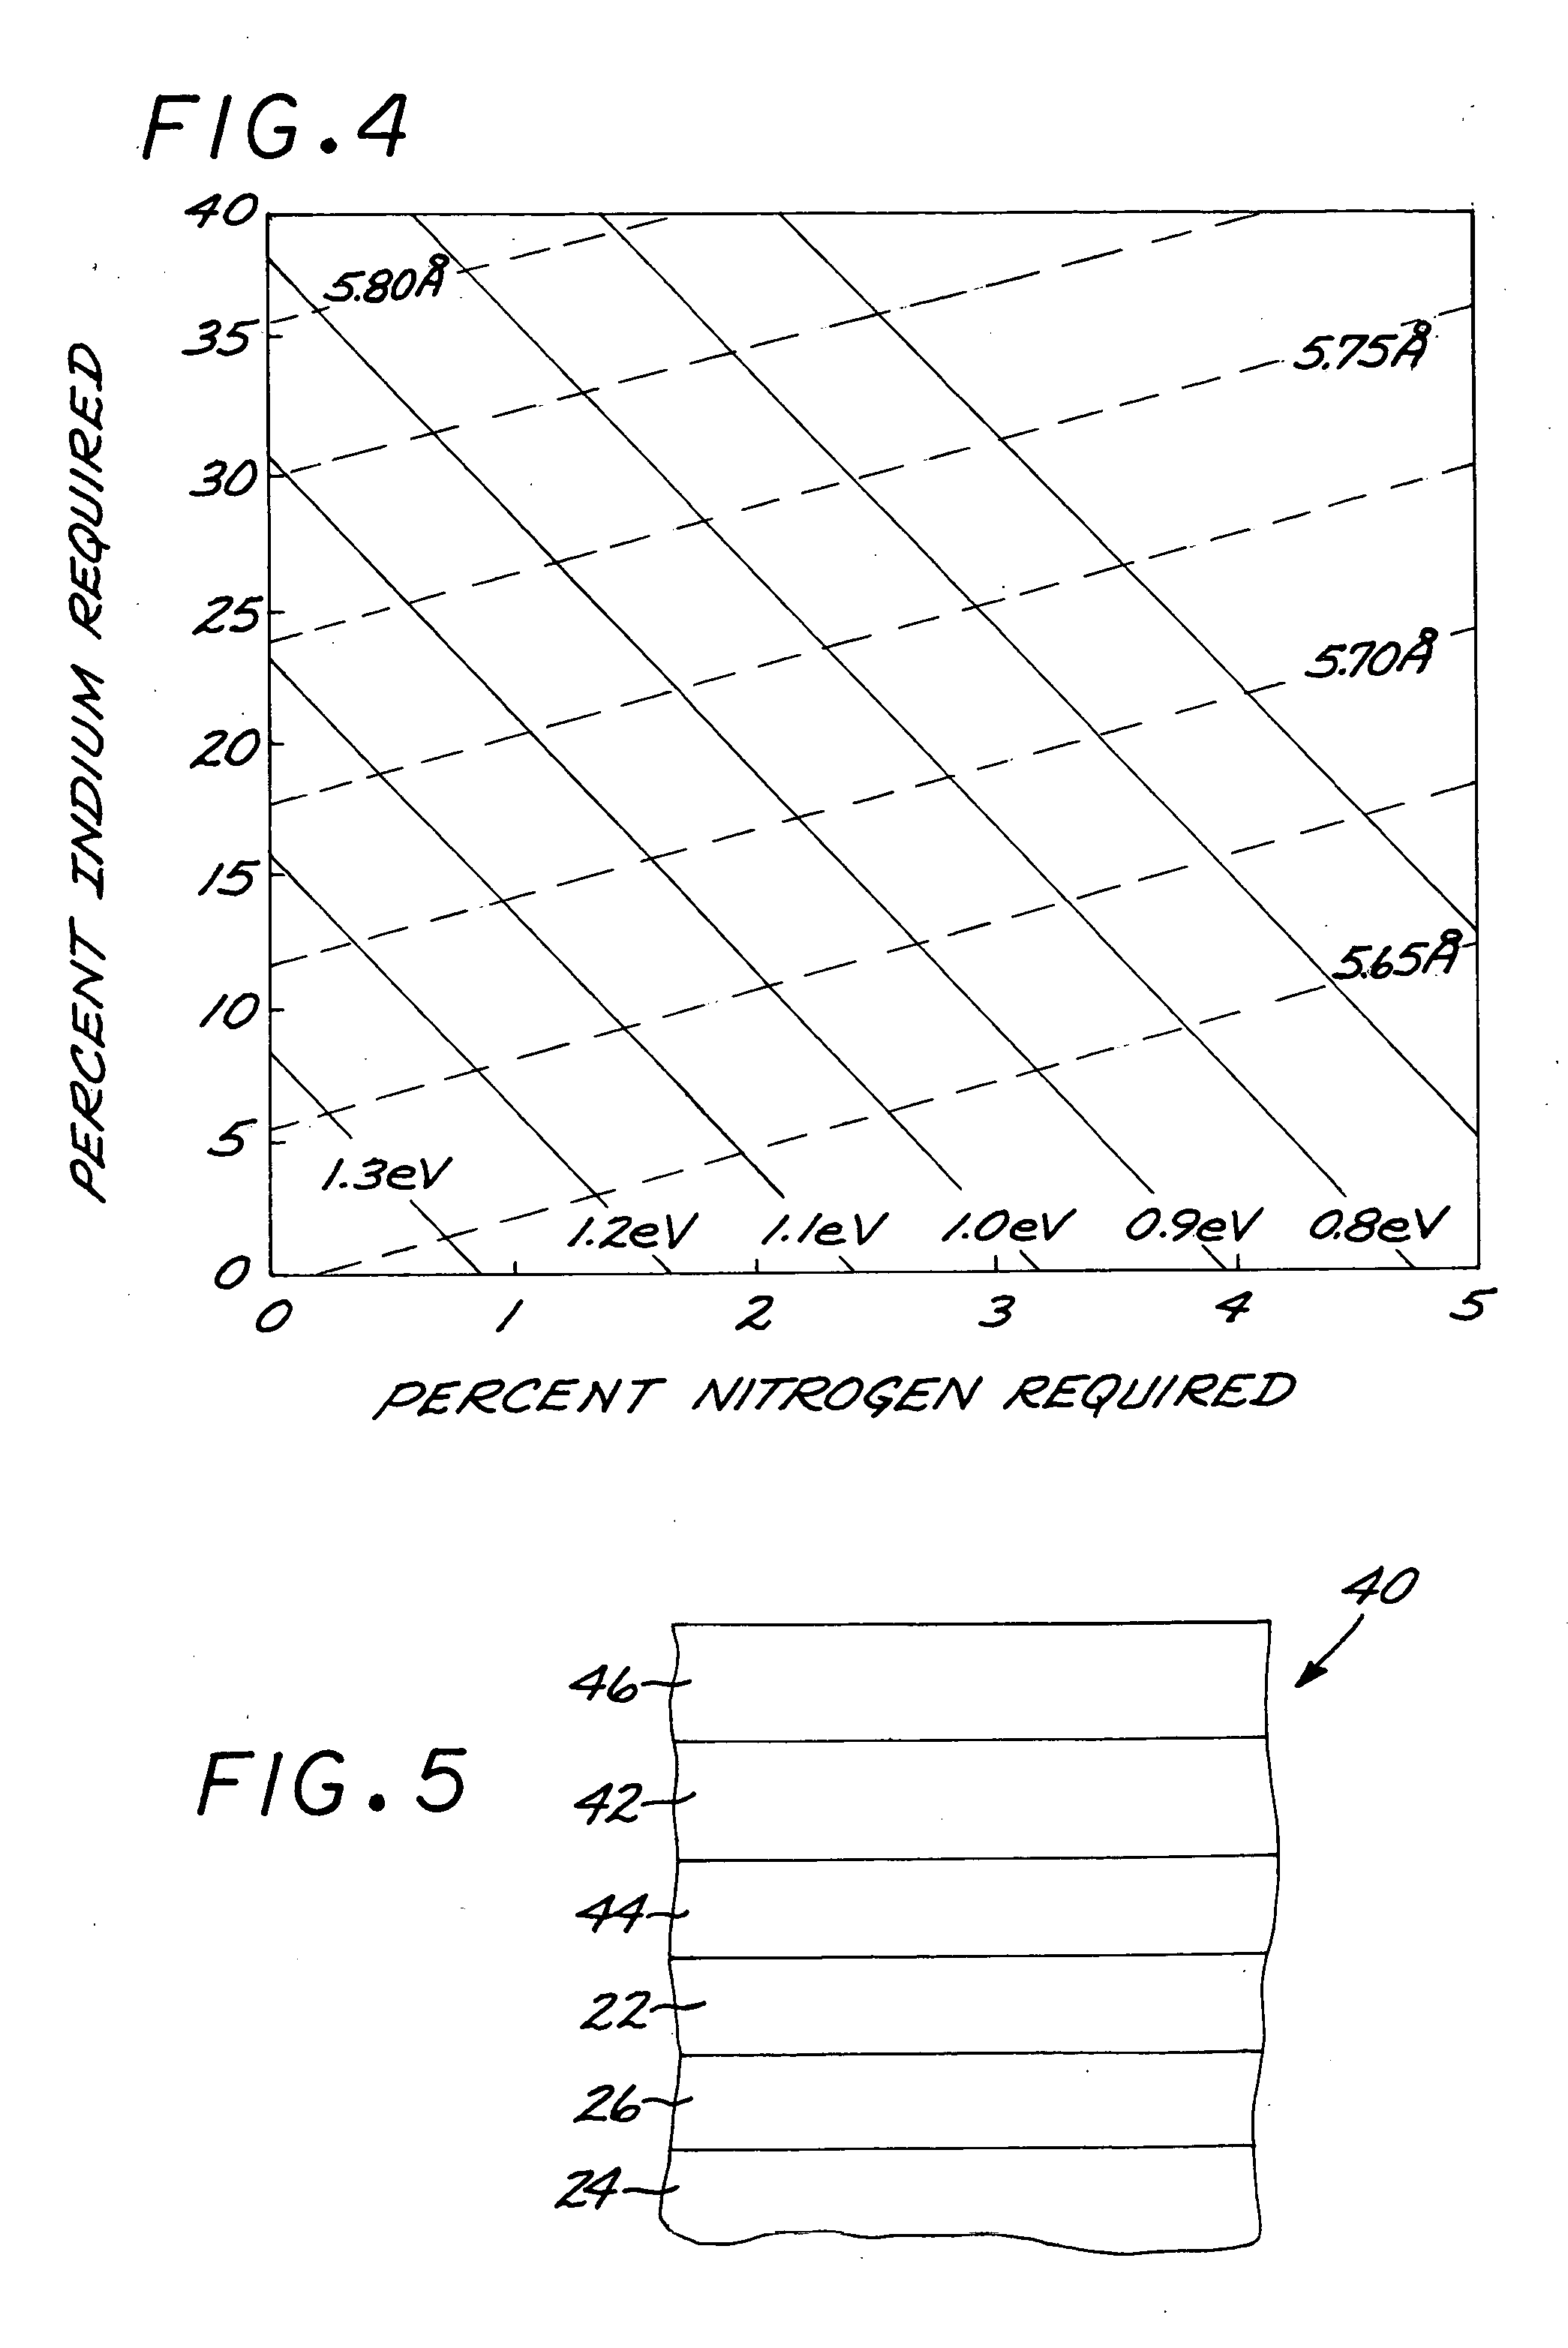 Multijunction solar cell having a lattice mismatched GrIII-GrV-X layer and a composition-graded buffer layer